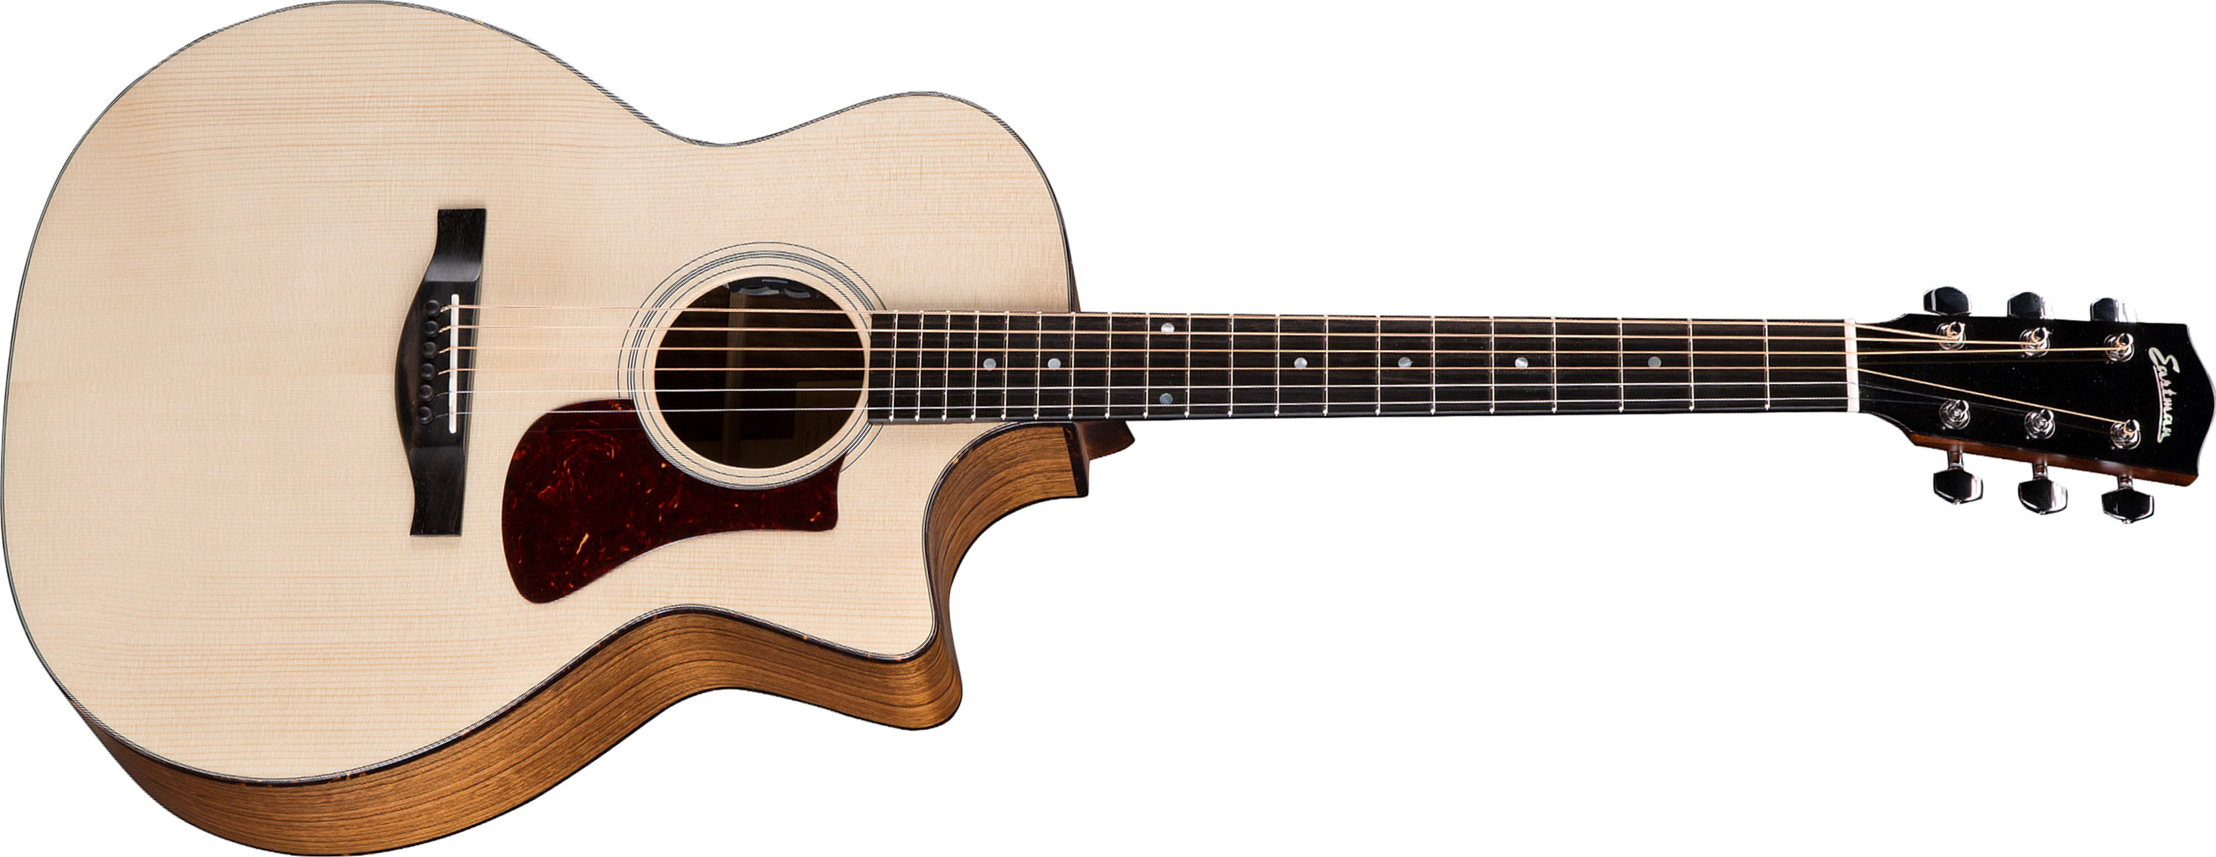 Eastman Ac222 Ce Grand Auditorium Cw Epicea Ovangkol Eb - Natural Satin - Electro acoustic guitar - Main picture